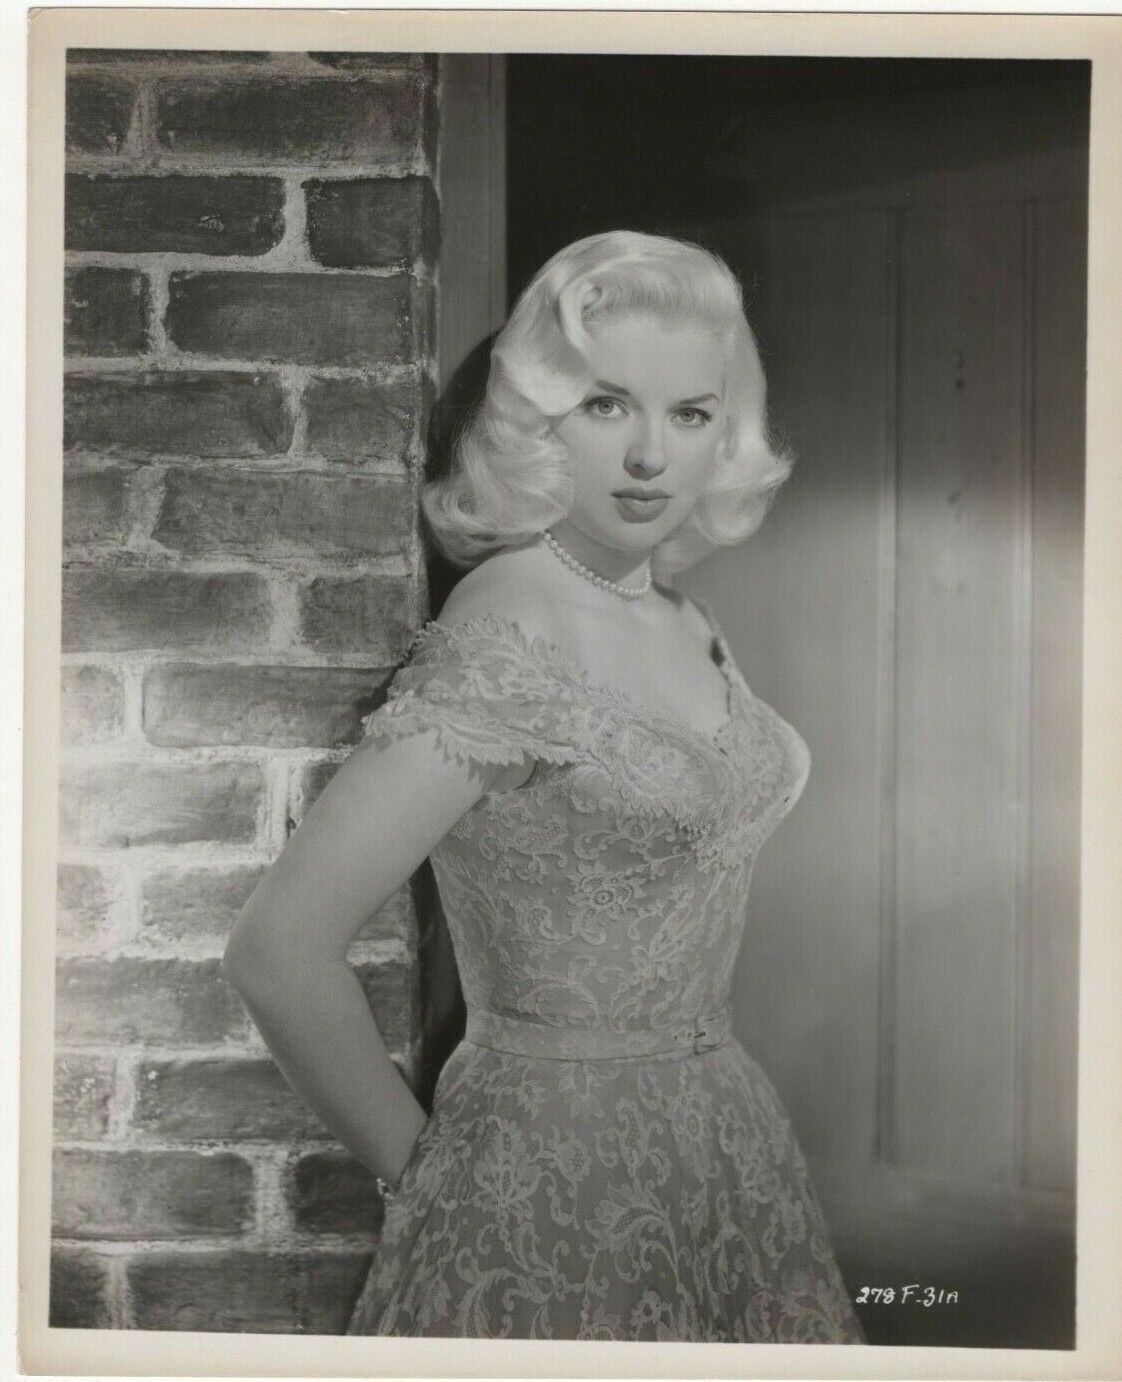 Bombshell Femme Fatale Diana Dors Orig 1955 SEXY BUSTY ALLURING POSE PHOTO 450